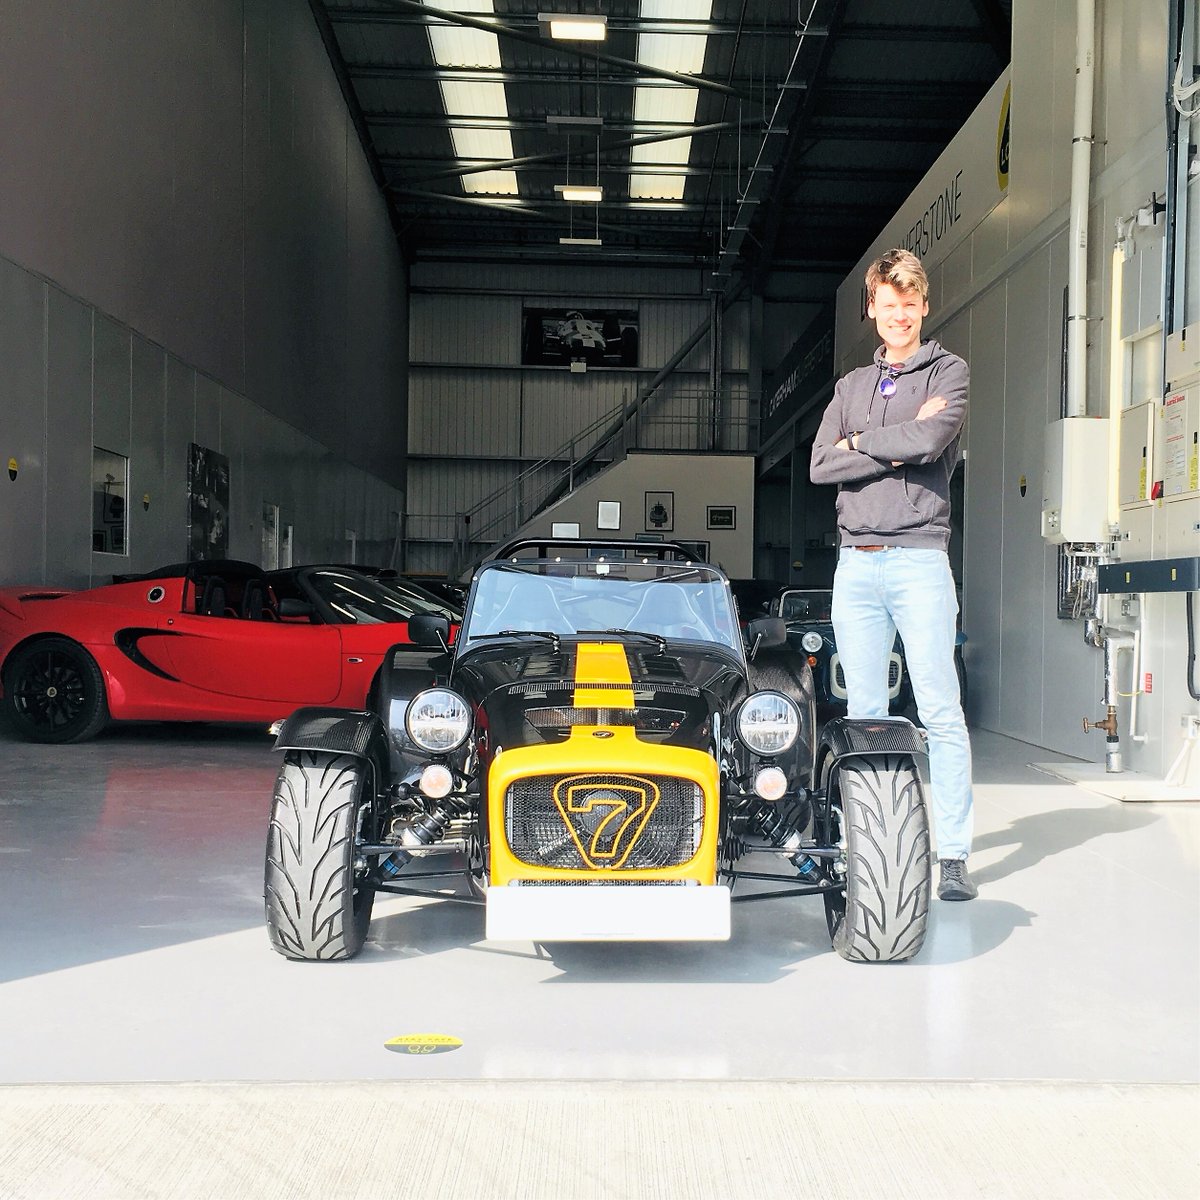 Chris has THE GRIN! 😁

We're pleased to welcome Chris into our ever expanding Caterham Family! 

Enjoy! 😎

Car: Caterham 420R finished in Custom Paint-Mercedes Obsidian Black  with Solarbean Yellow  Stripe 💛🖤🐝

#LCS1117 #TheGrin #Caterham #Caterham420R #tracktoy #Newcardday